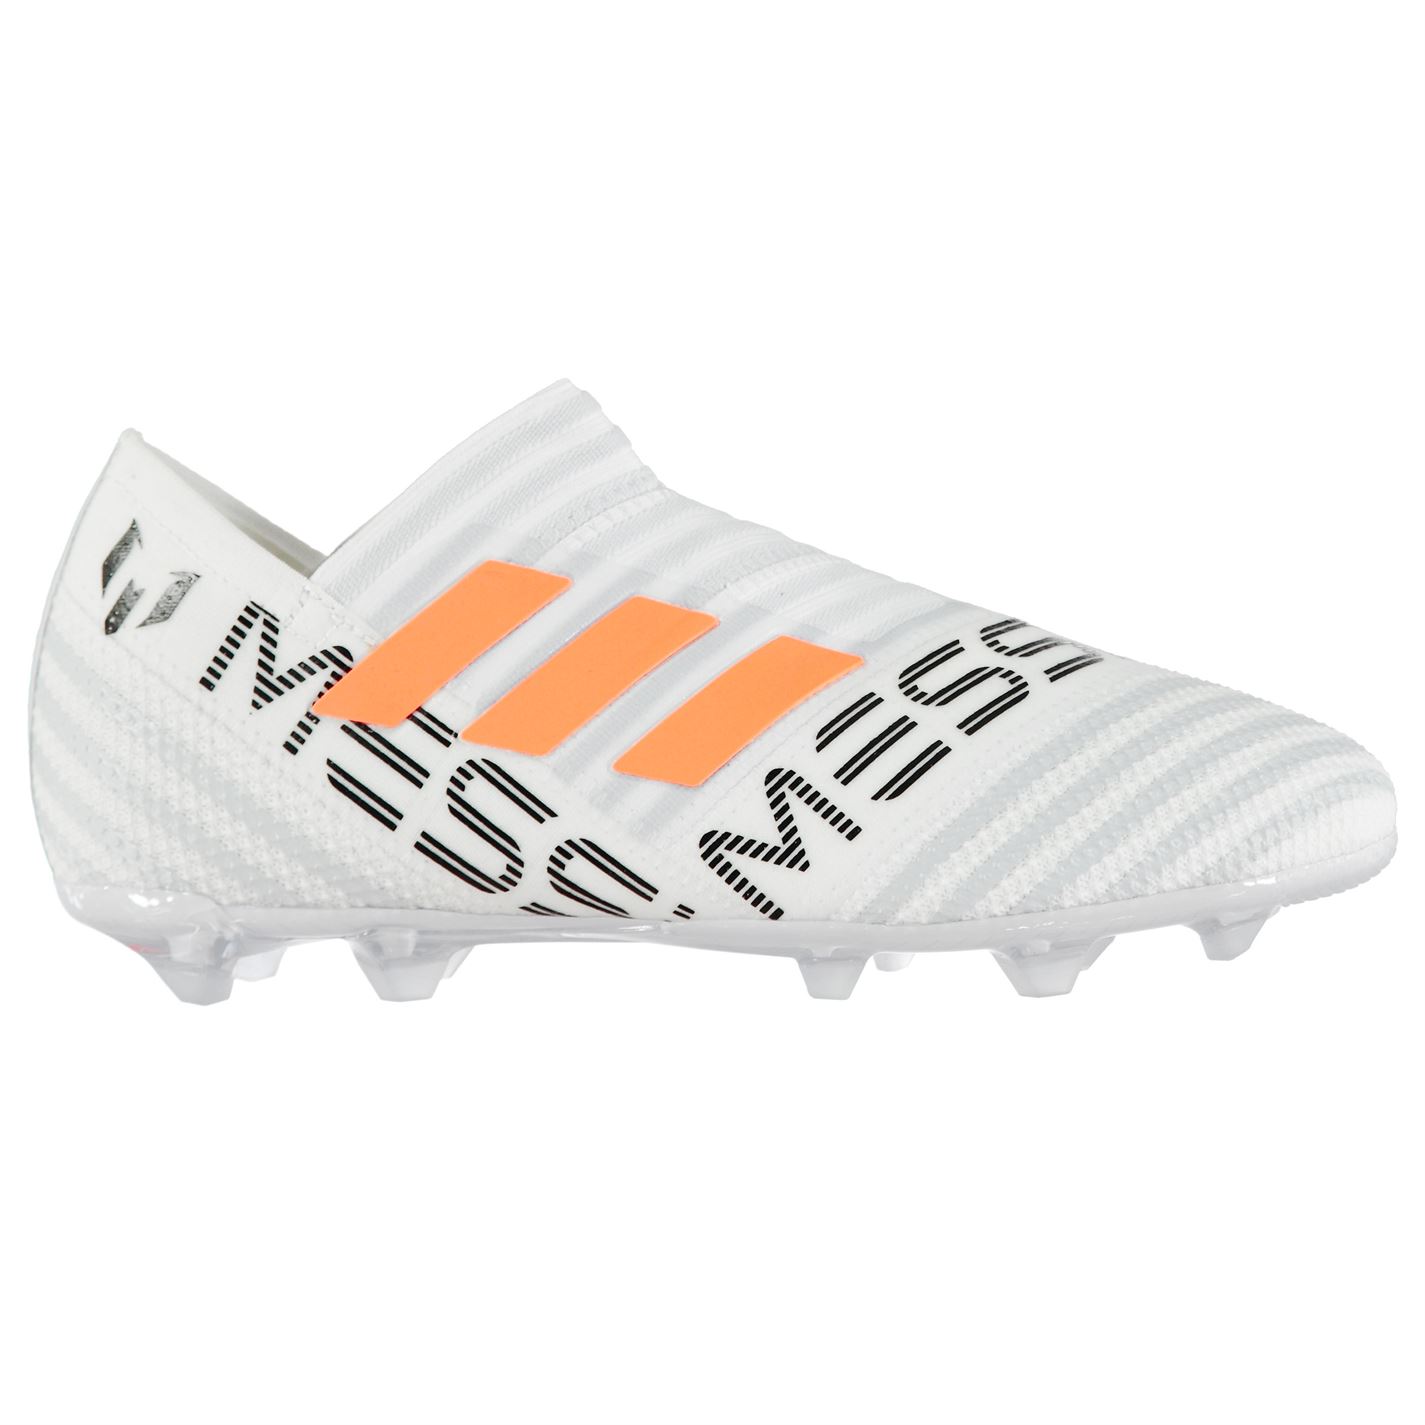 laceless messi cleats